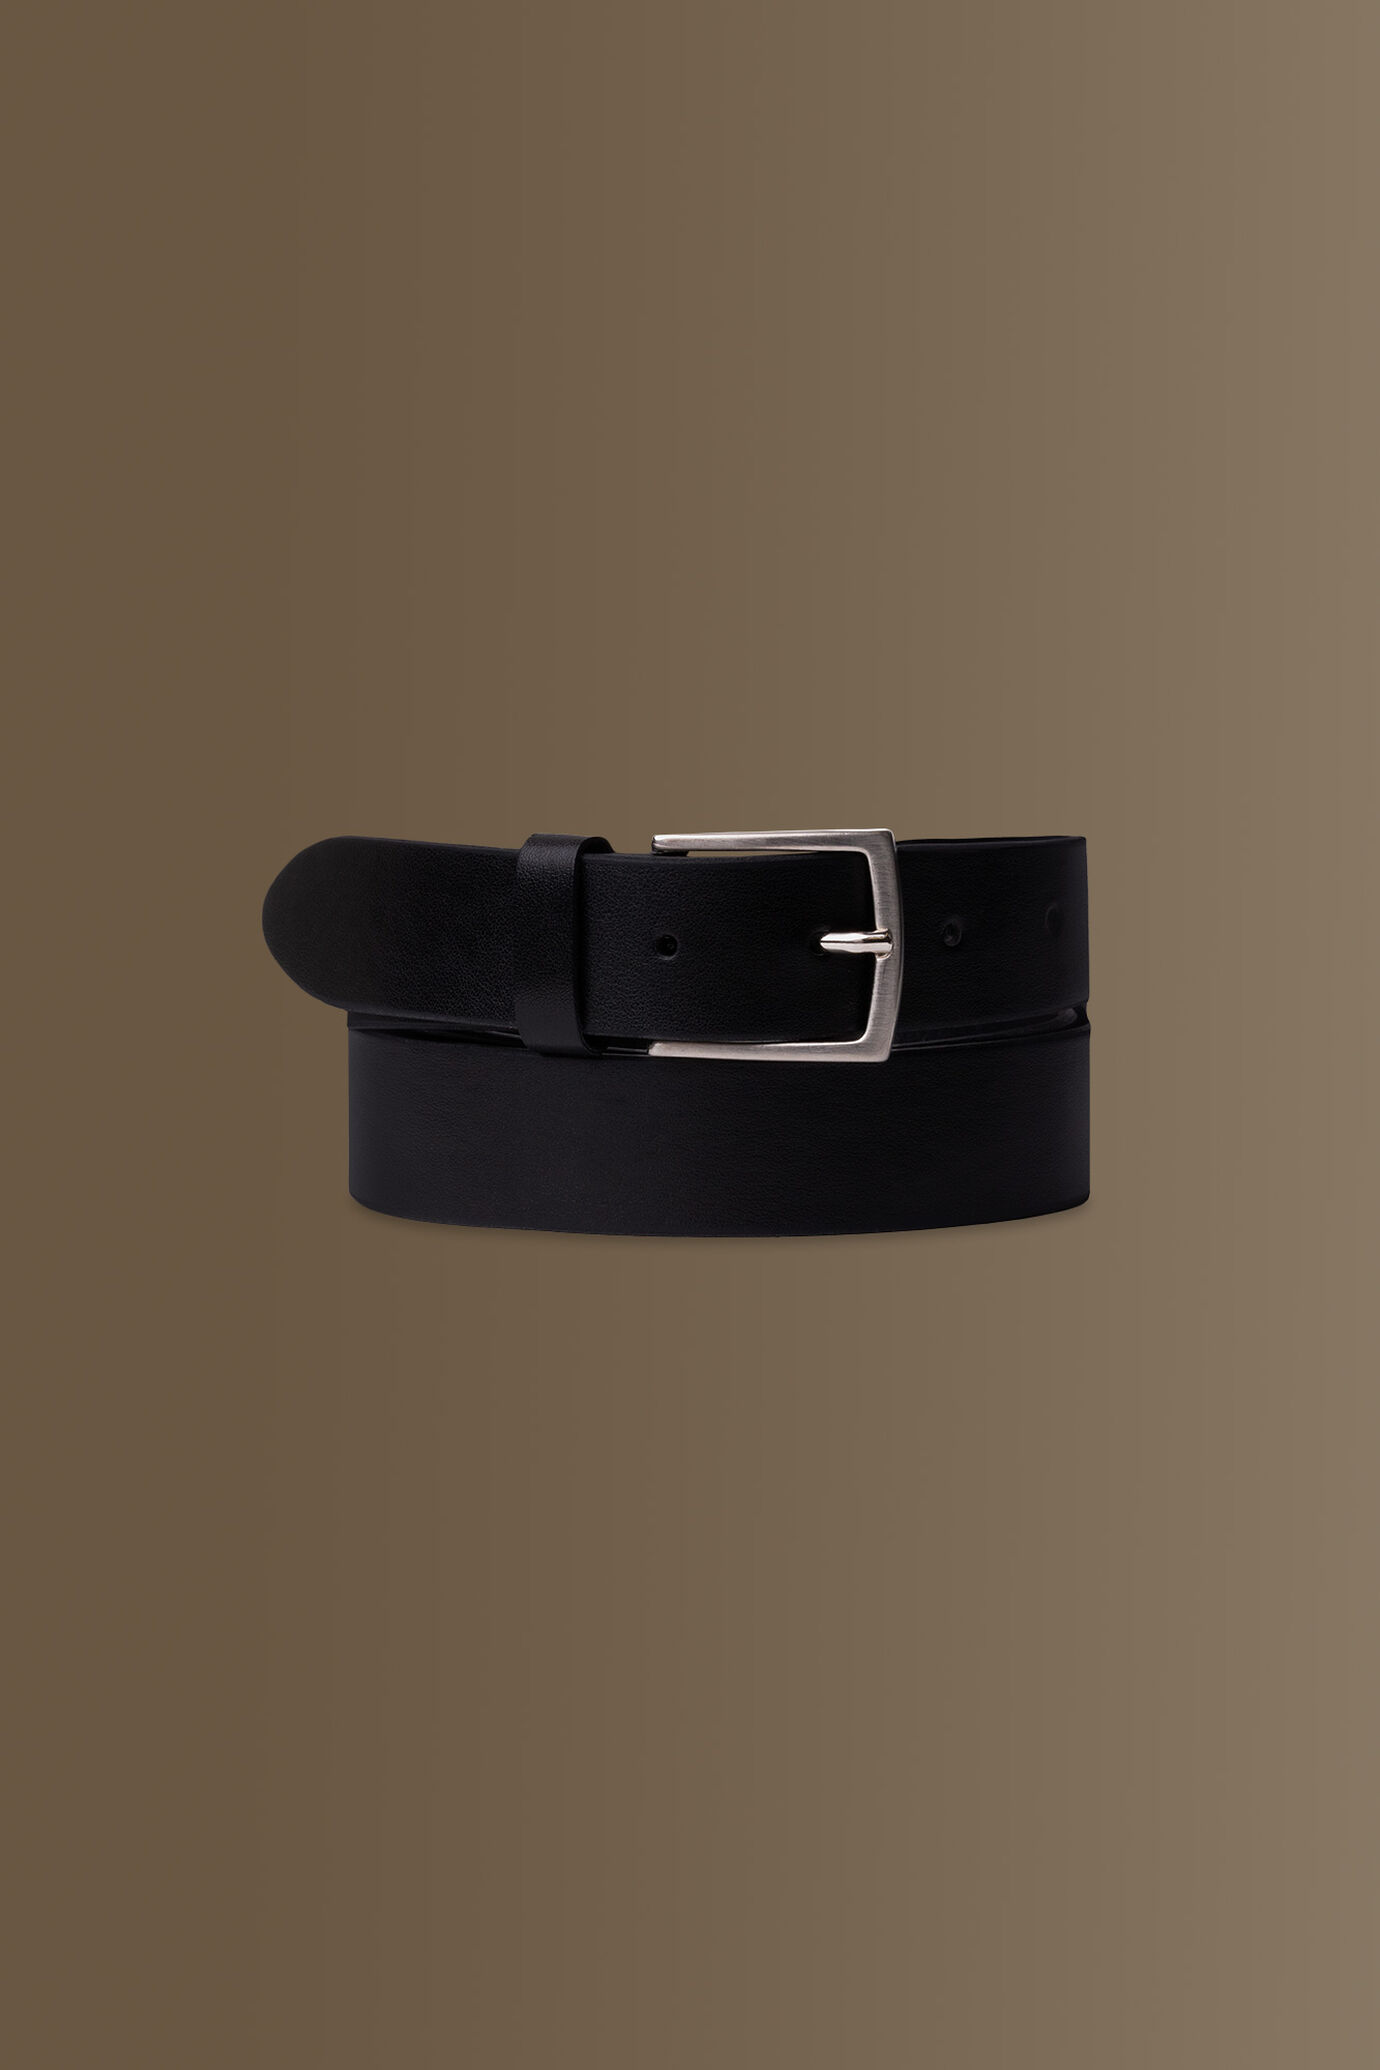 Classic belt combined leather